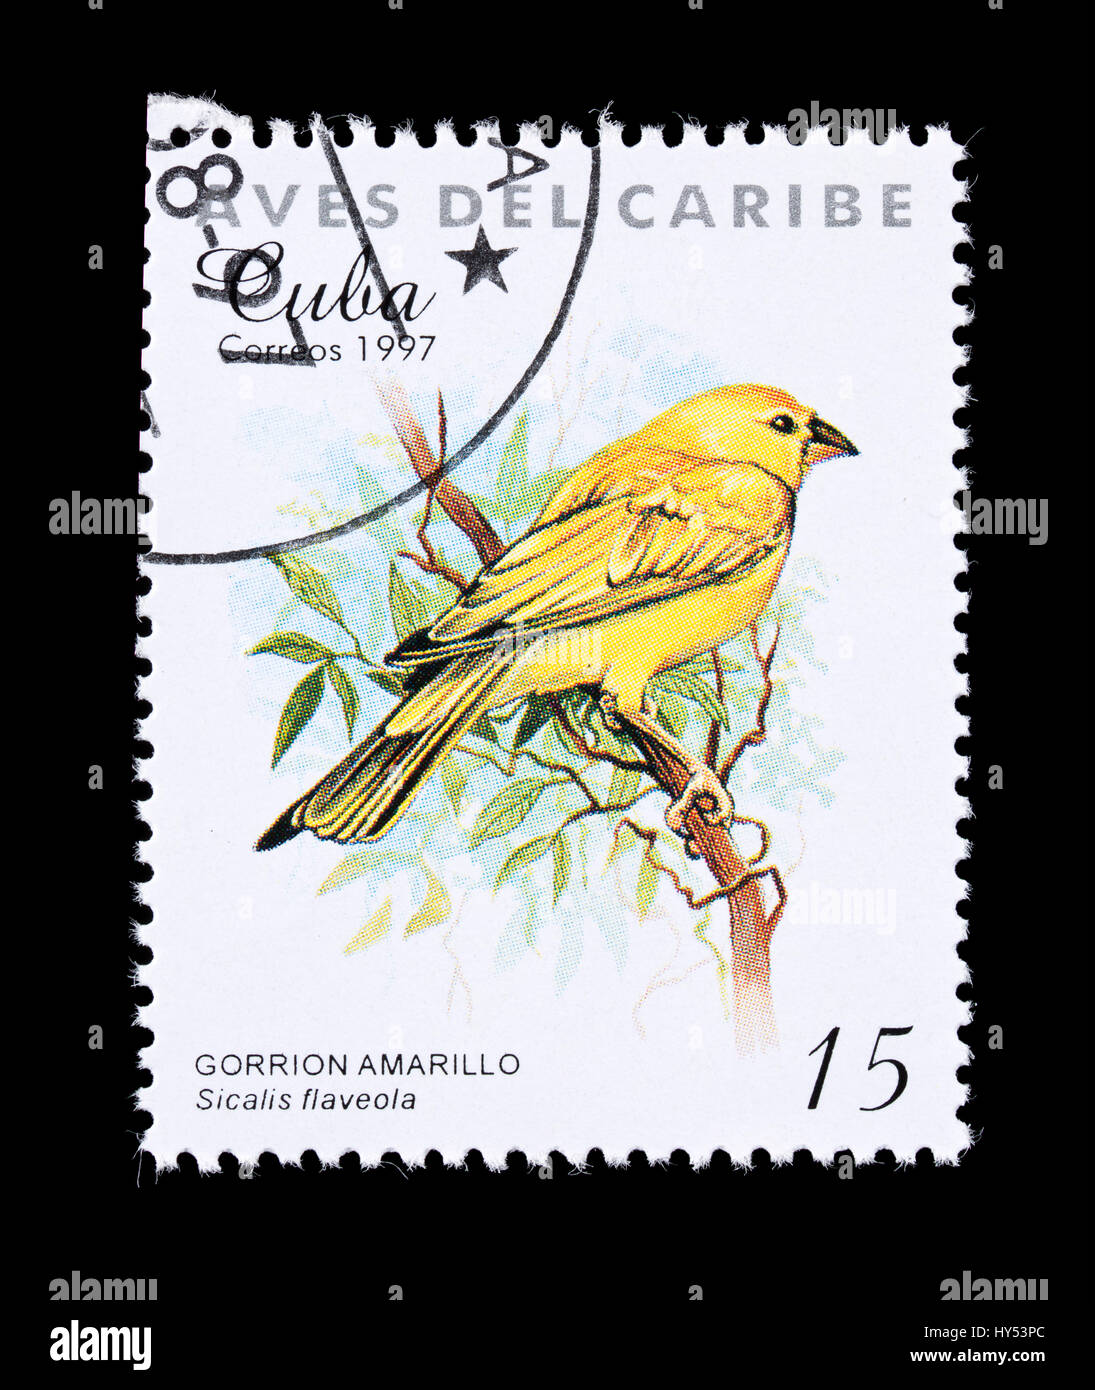 Postage stamp from Cuba depicting a saffron finch (Sicalis flaveola) Stock Photo